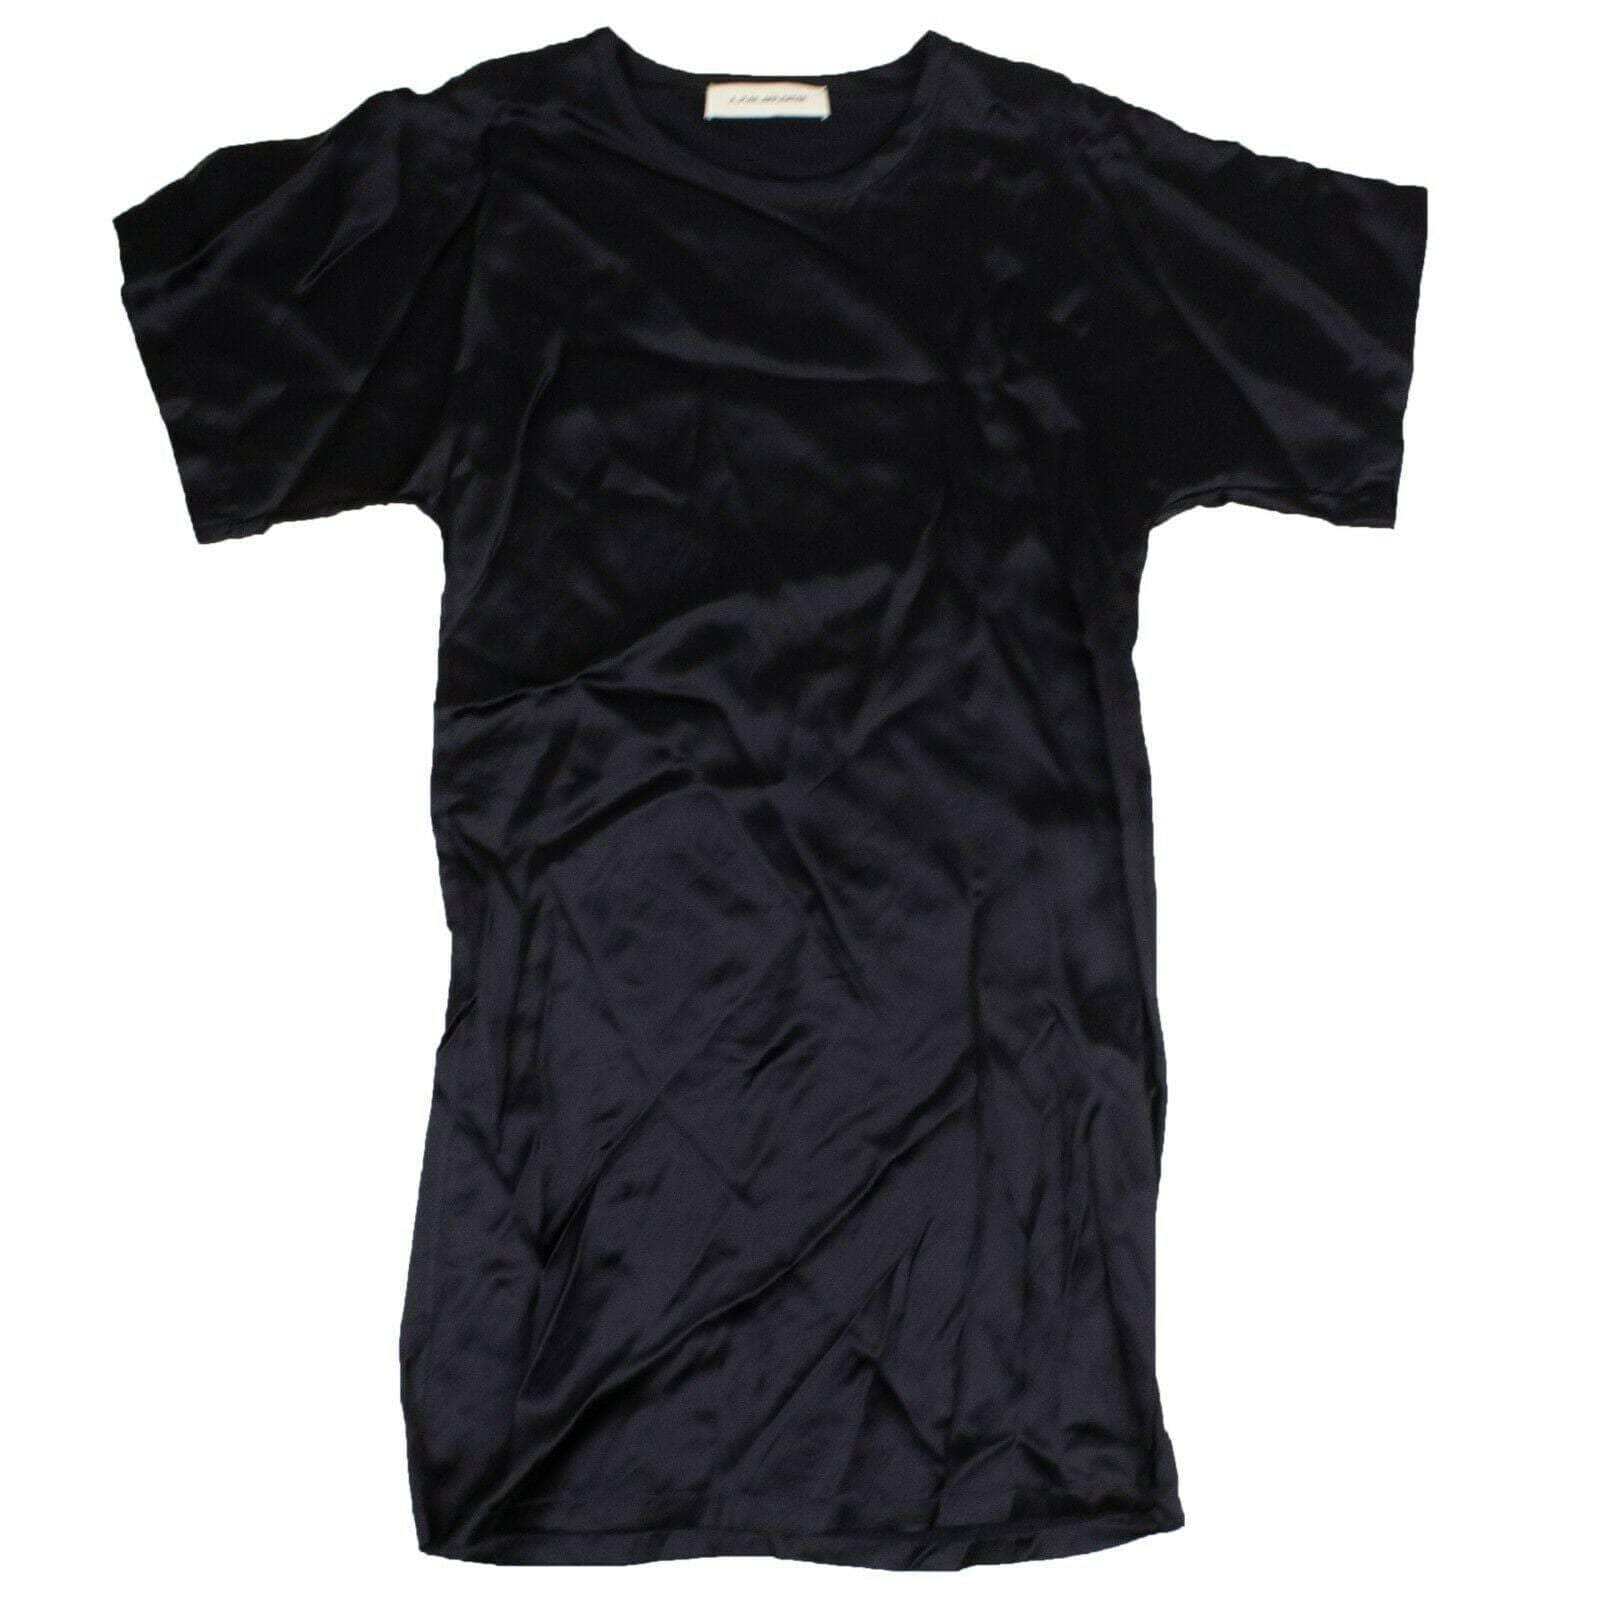 A_Plan_Application a_plan_application, channelenable-all, chicmi, couponcollection, gender-womens, main-clothing, size-s, under-250, womens-day-dresses S Navy Satin T-Shirt Dress 74NGG-AP-6/S 74NGG-AP-6/S